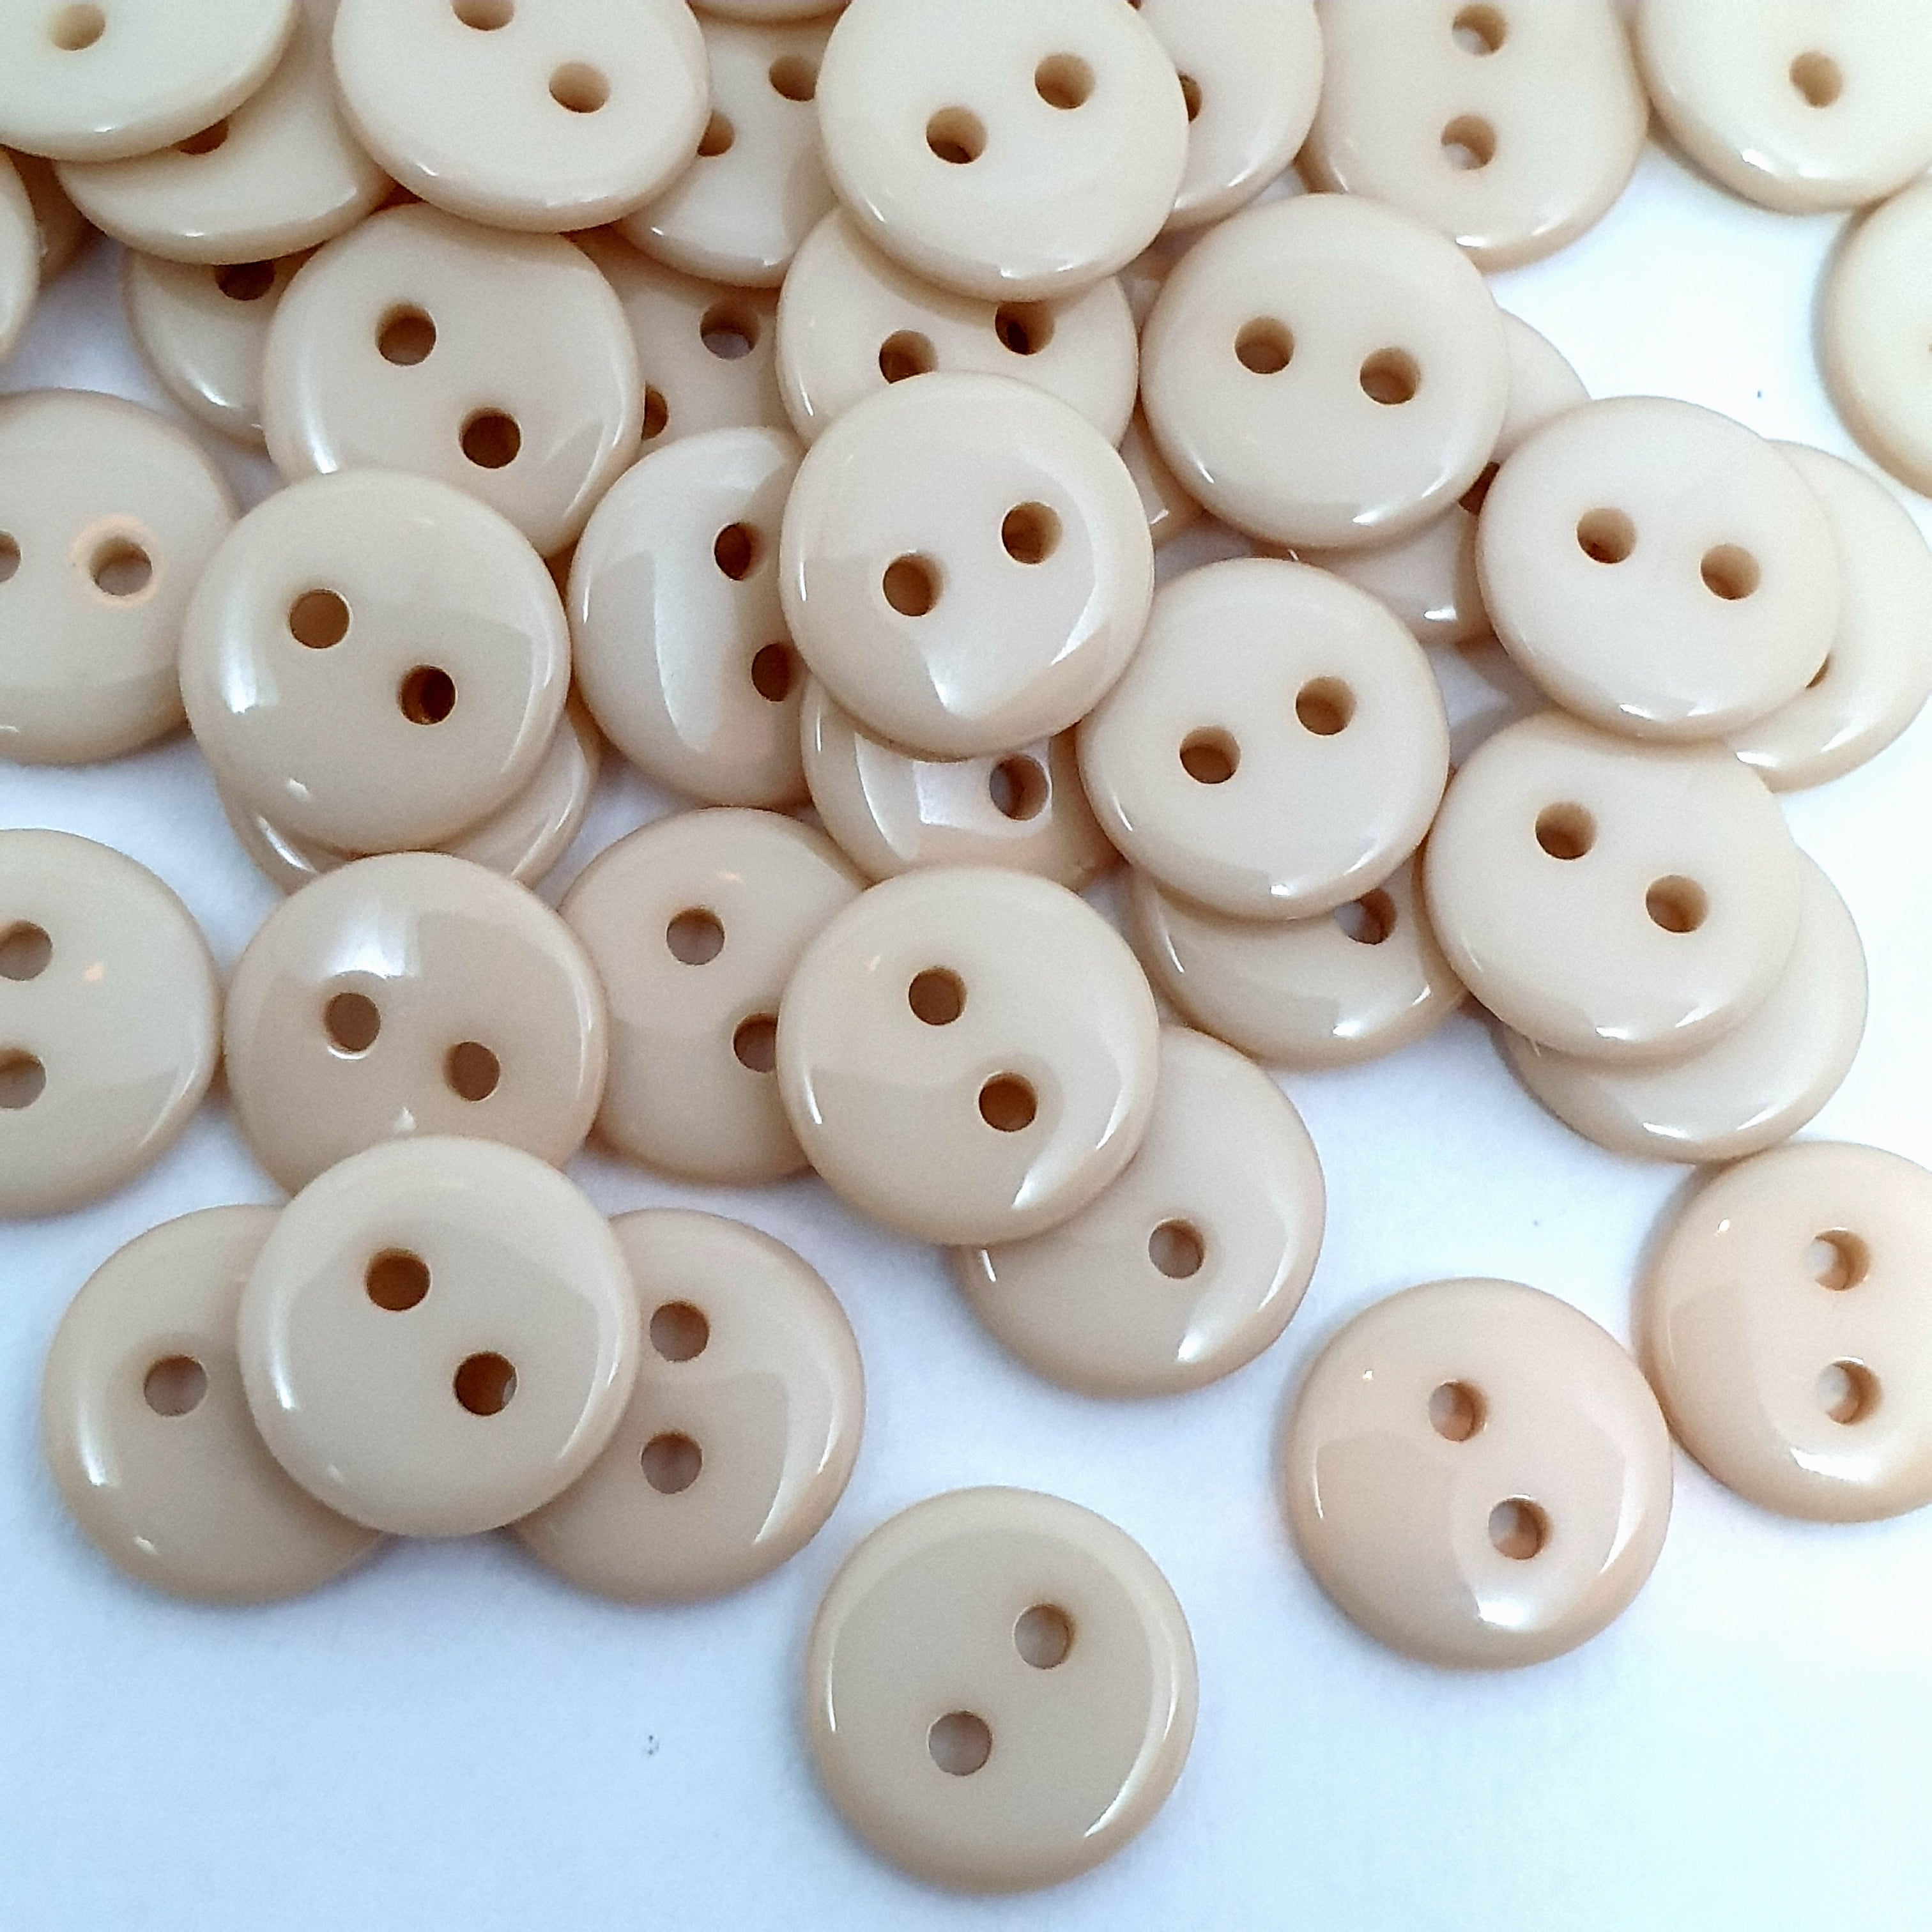 MajorCrafts 120pcs 9mm Sepia Brown Small 2 Holes Round Resin Sewing Buttons B18